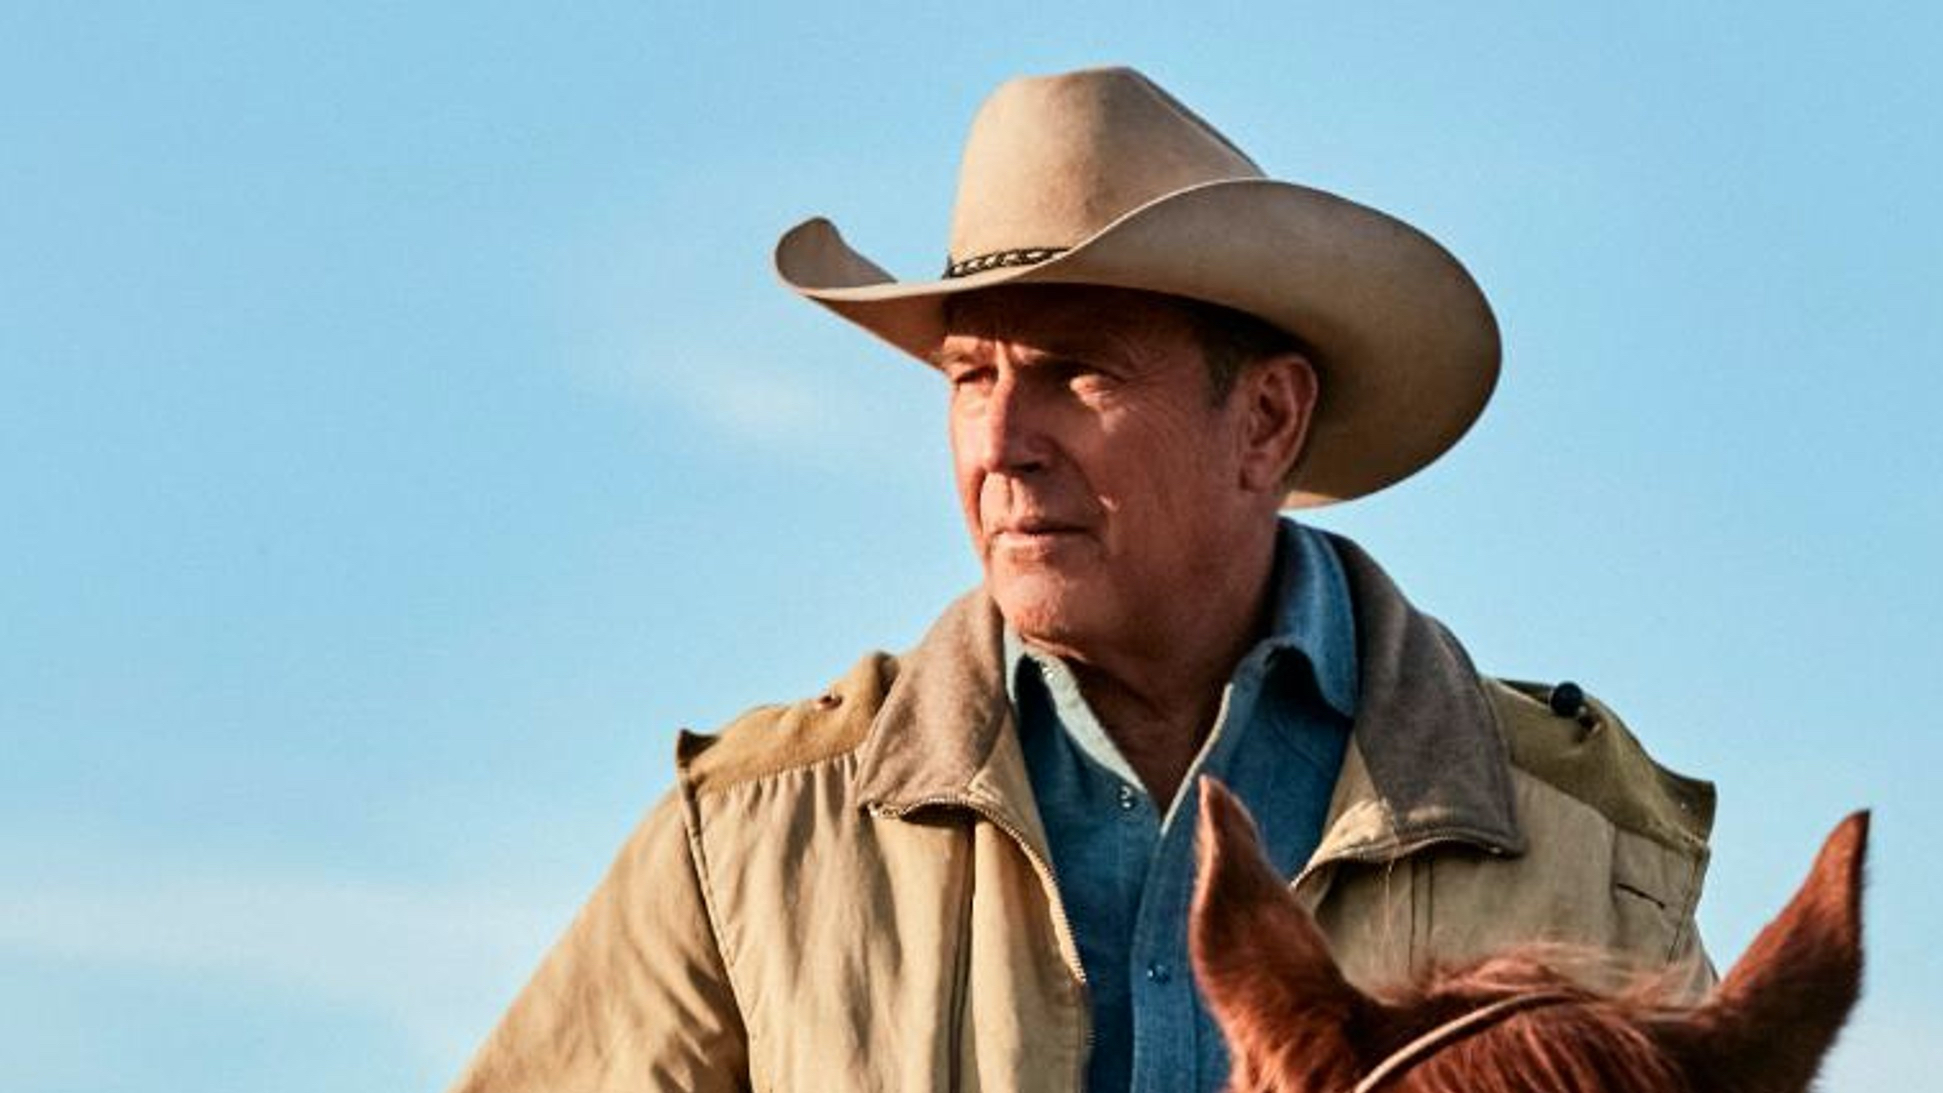 Yellowstone season 5 sets premiere date: Everything we know so far